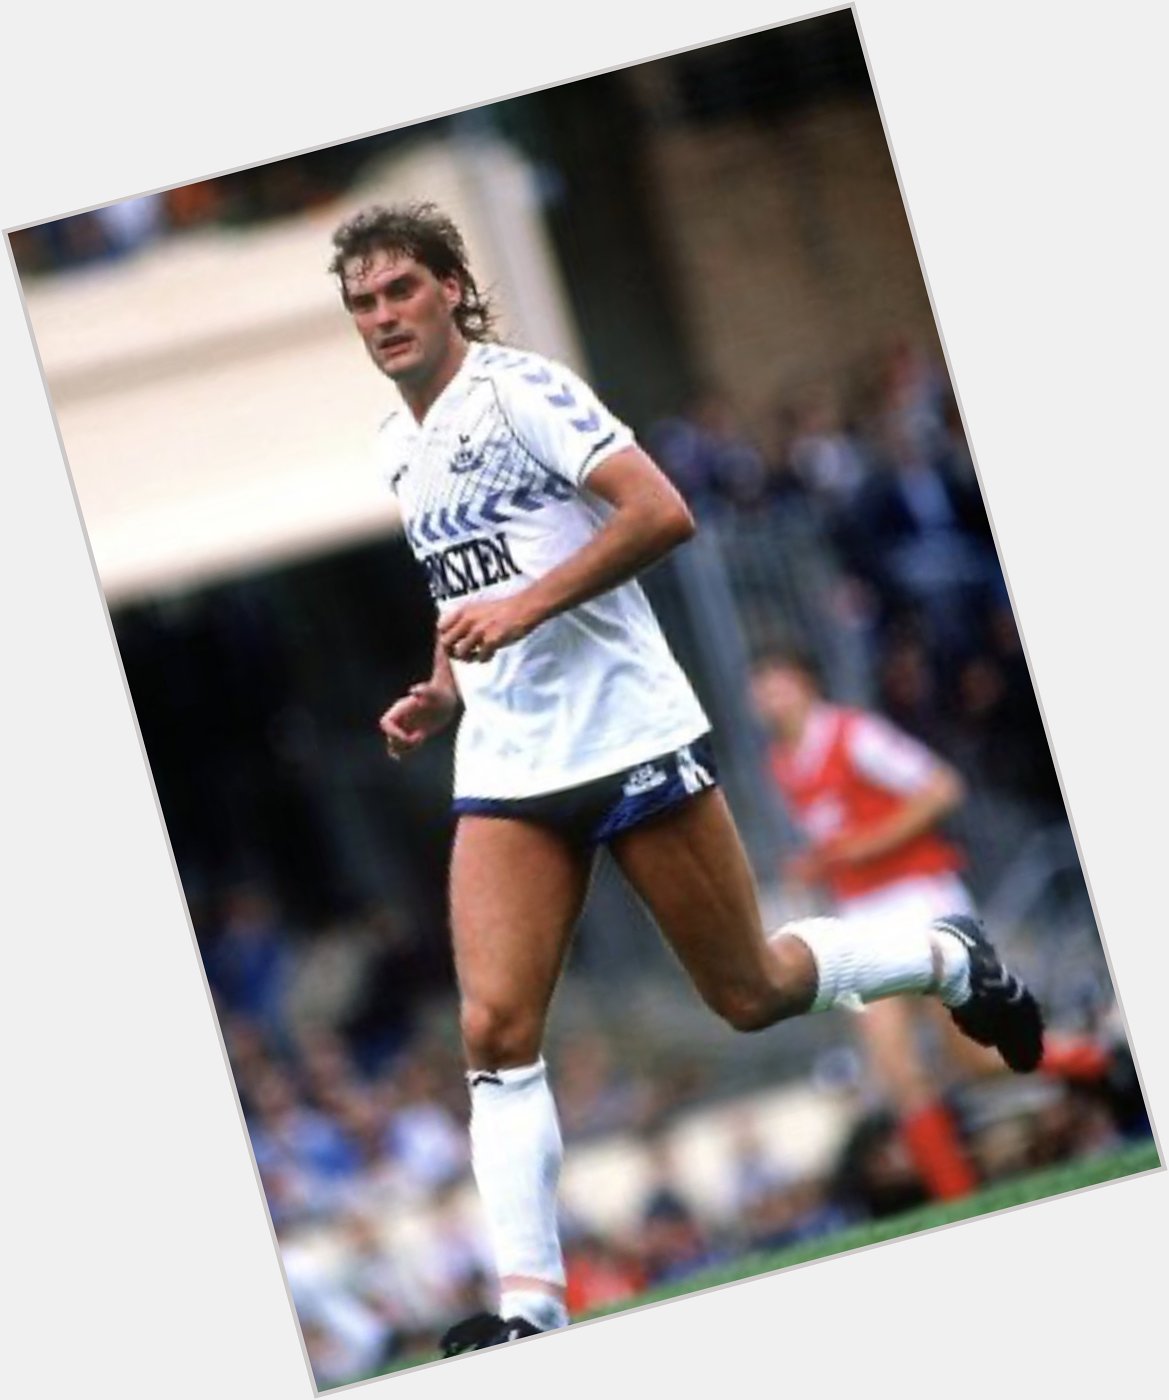 Happy birthday to my first ever idol Glenn Hoddle that got me support Spurs 